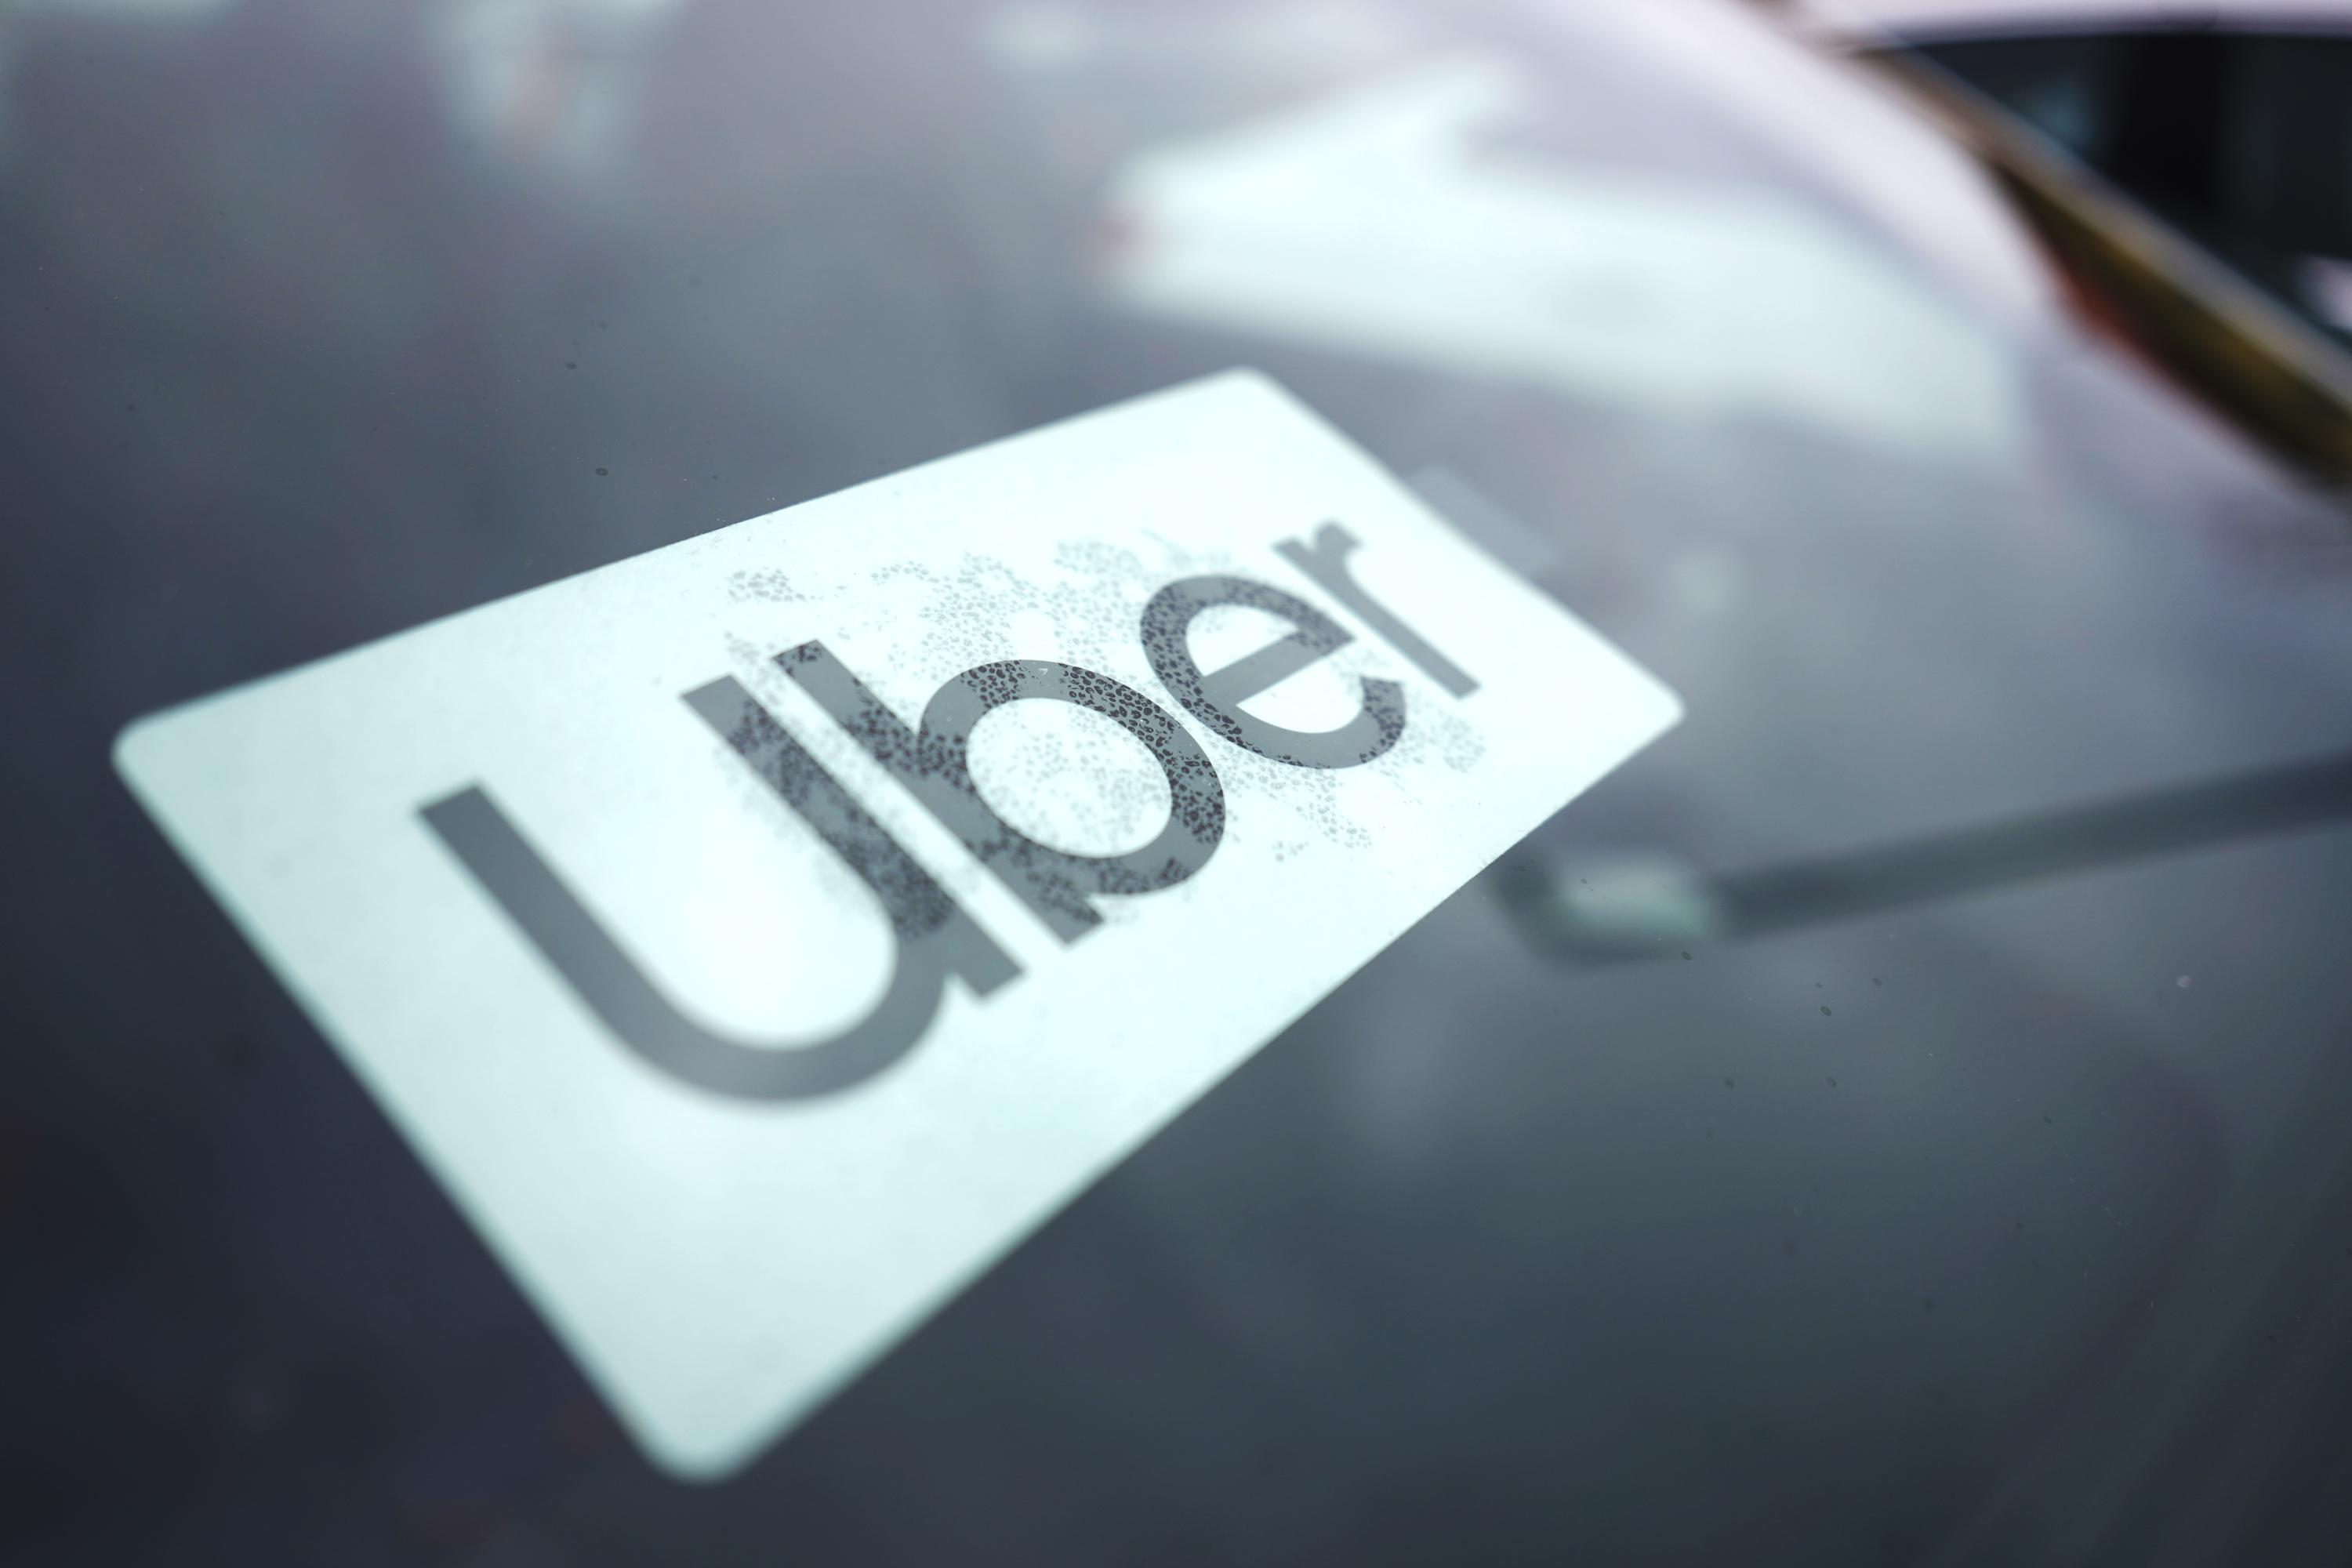 Report: Uber lobbied, used 'stealth' tech to block scrutiny